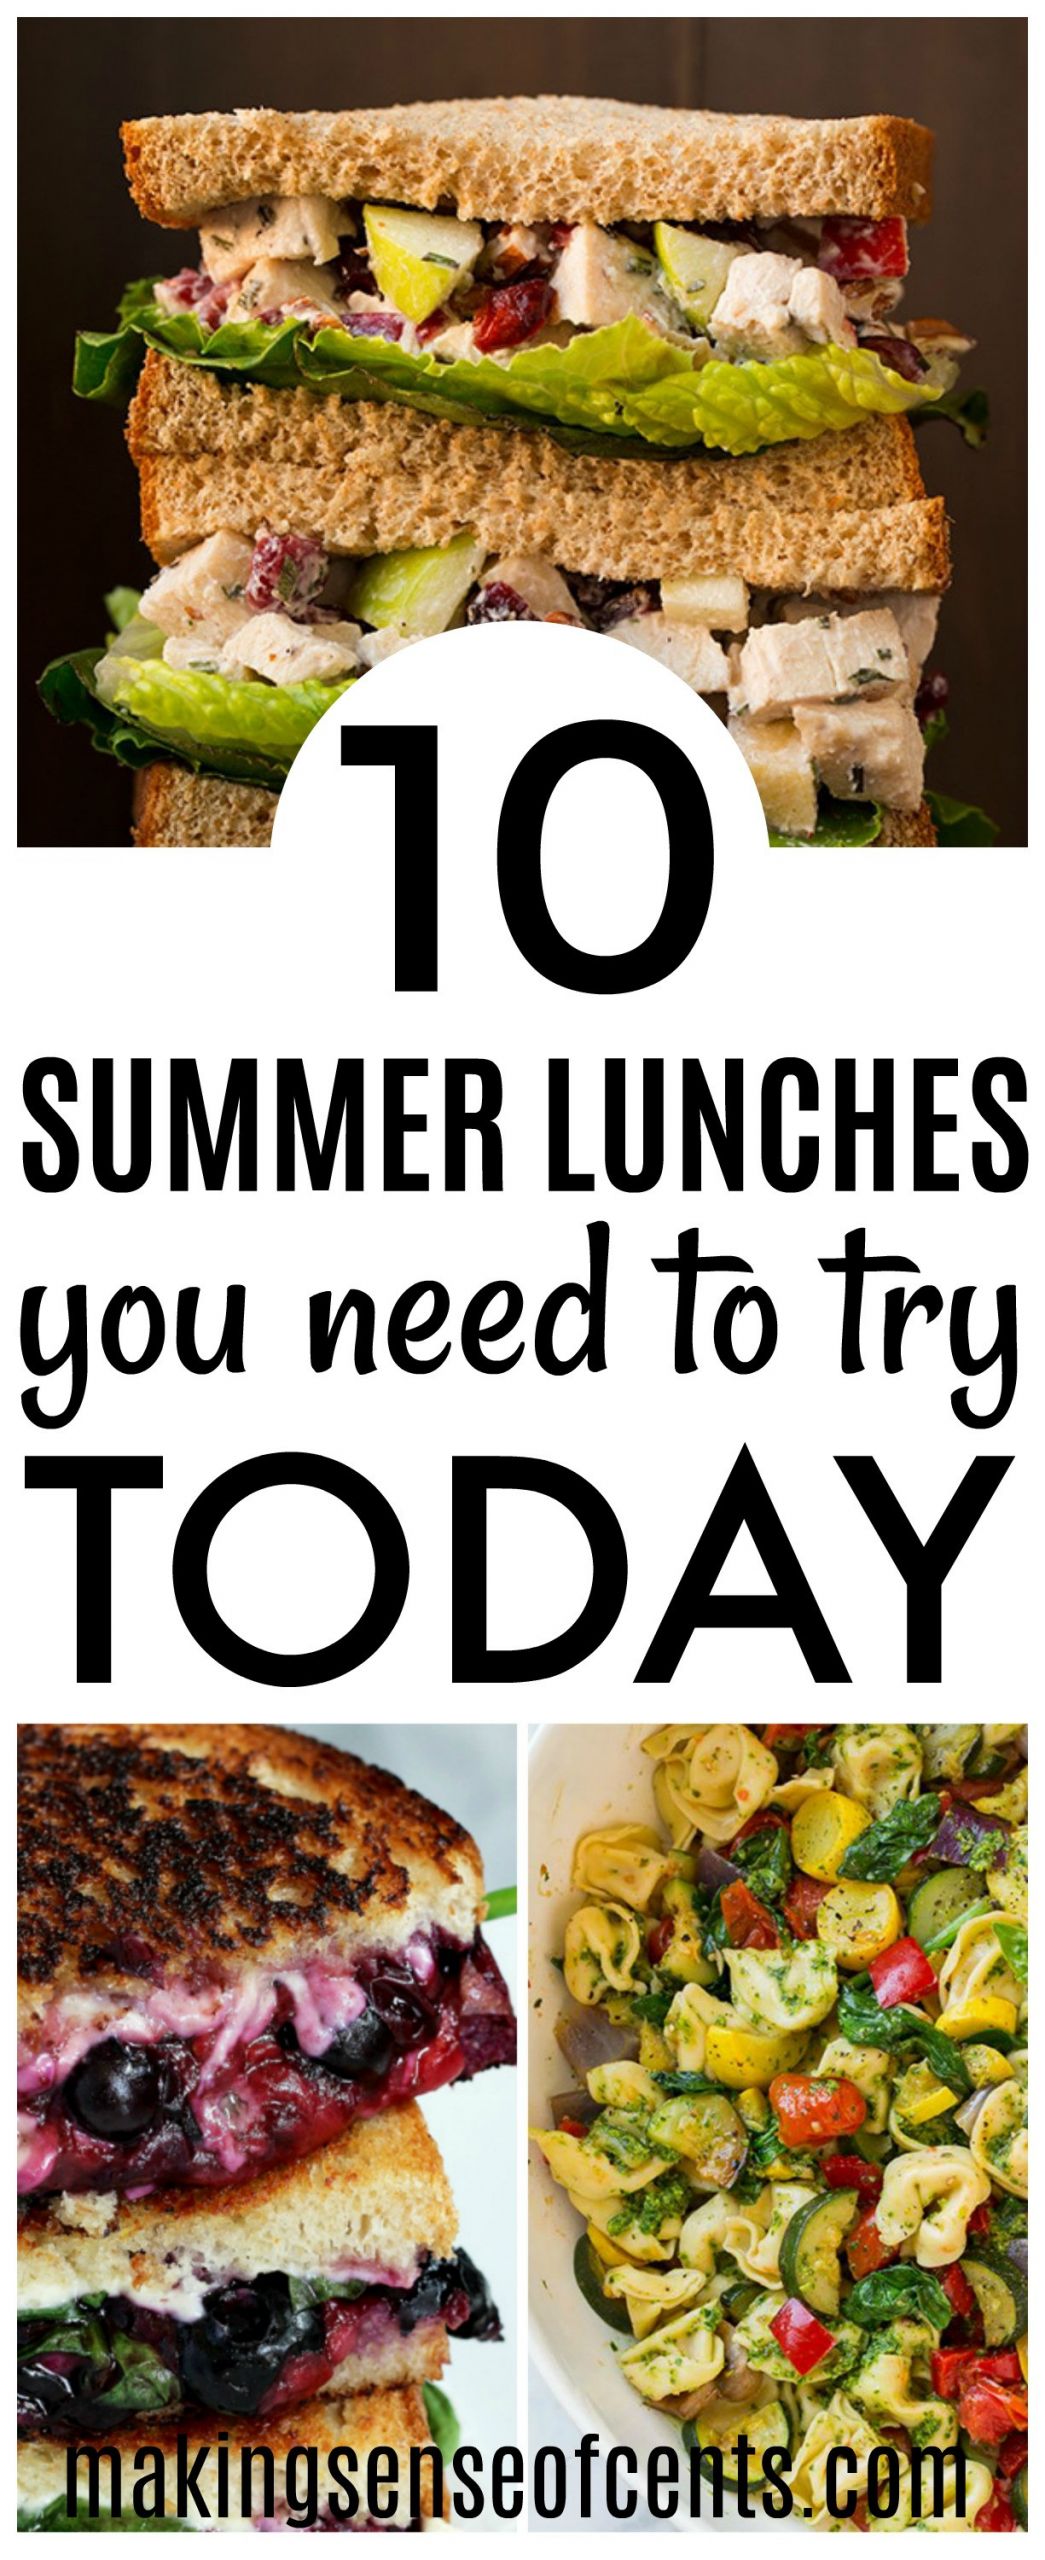 Summer Luncheon Menu Ideas
 10 Delicious Summer Lunch Ideas Summer Meals You Need To